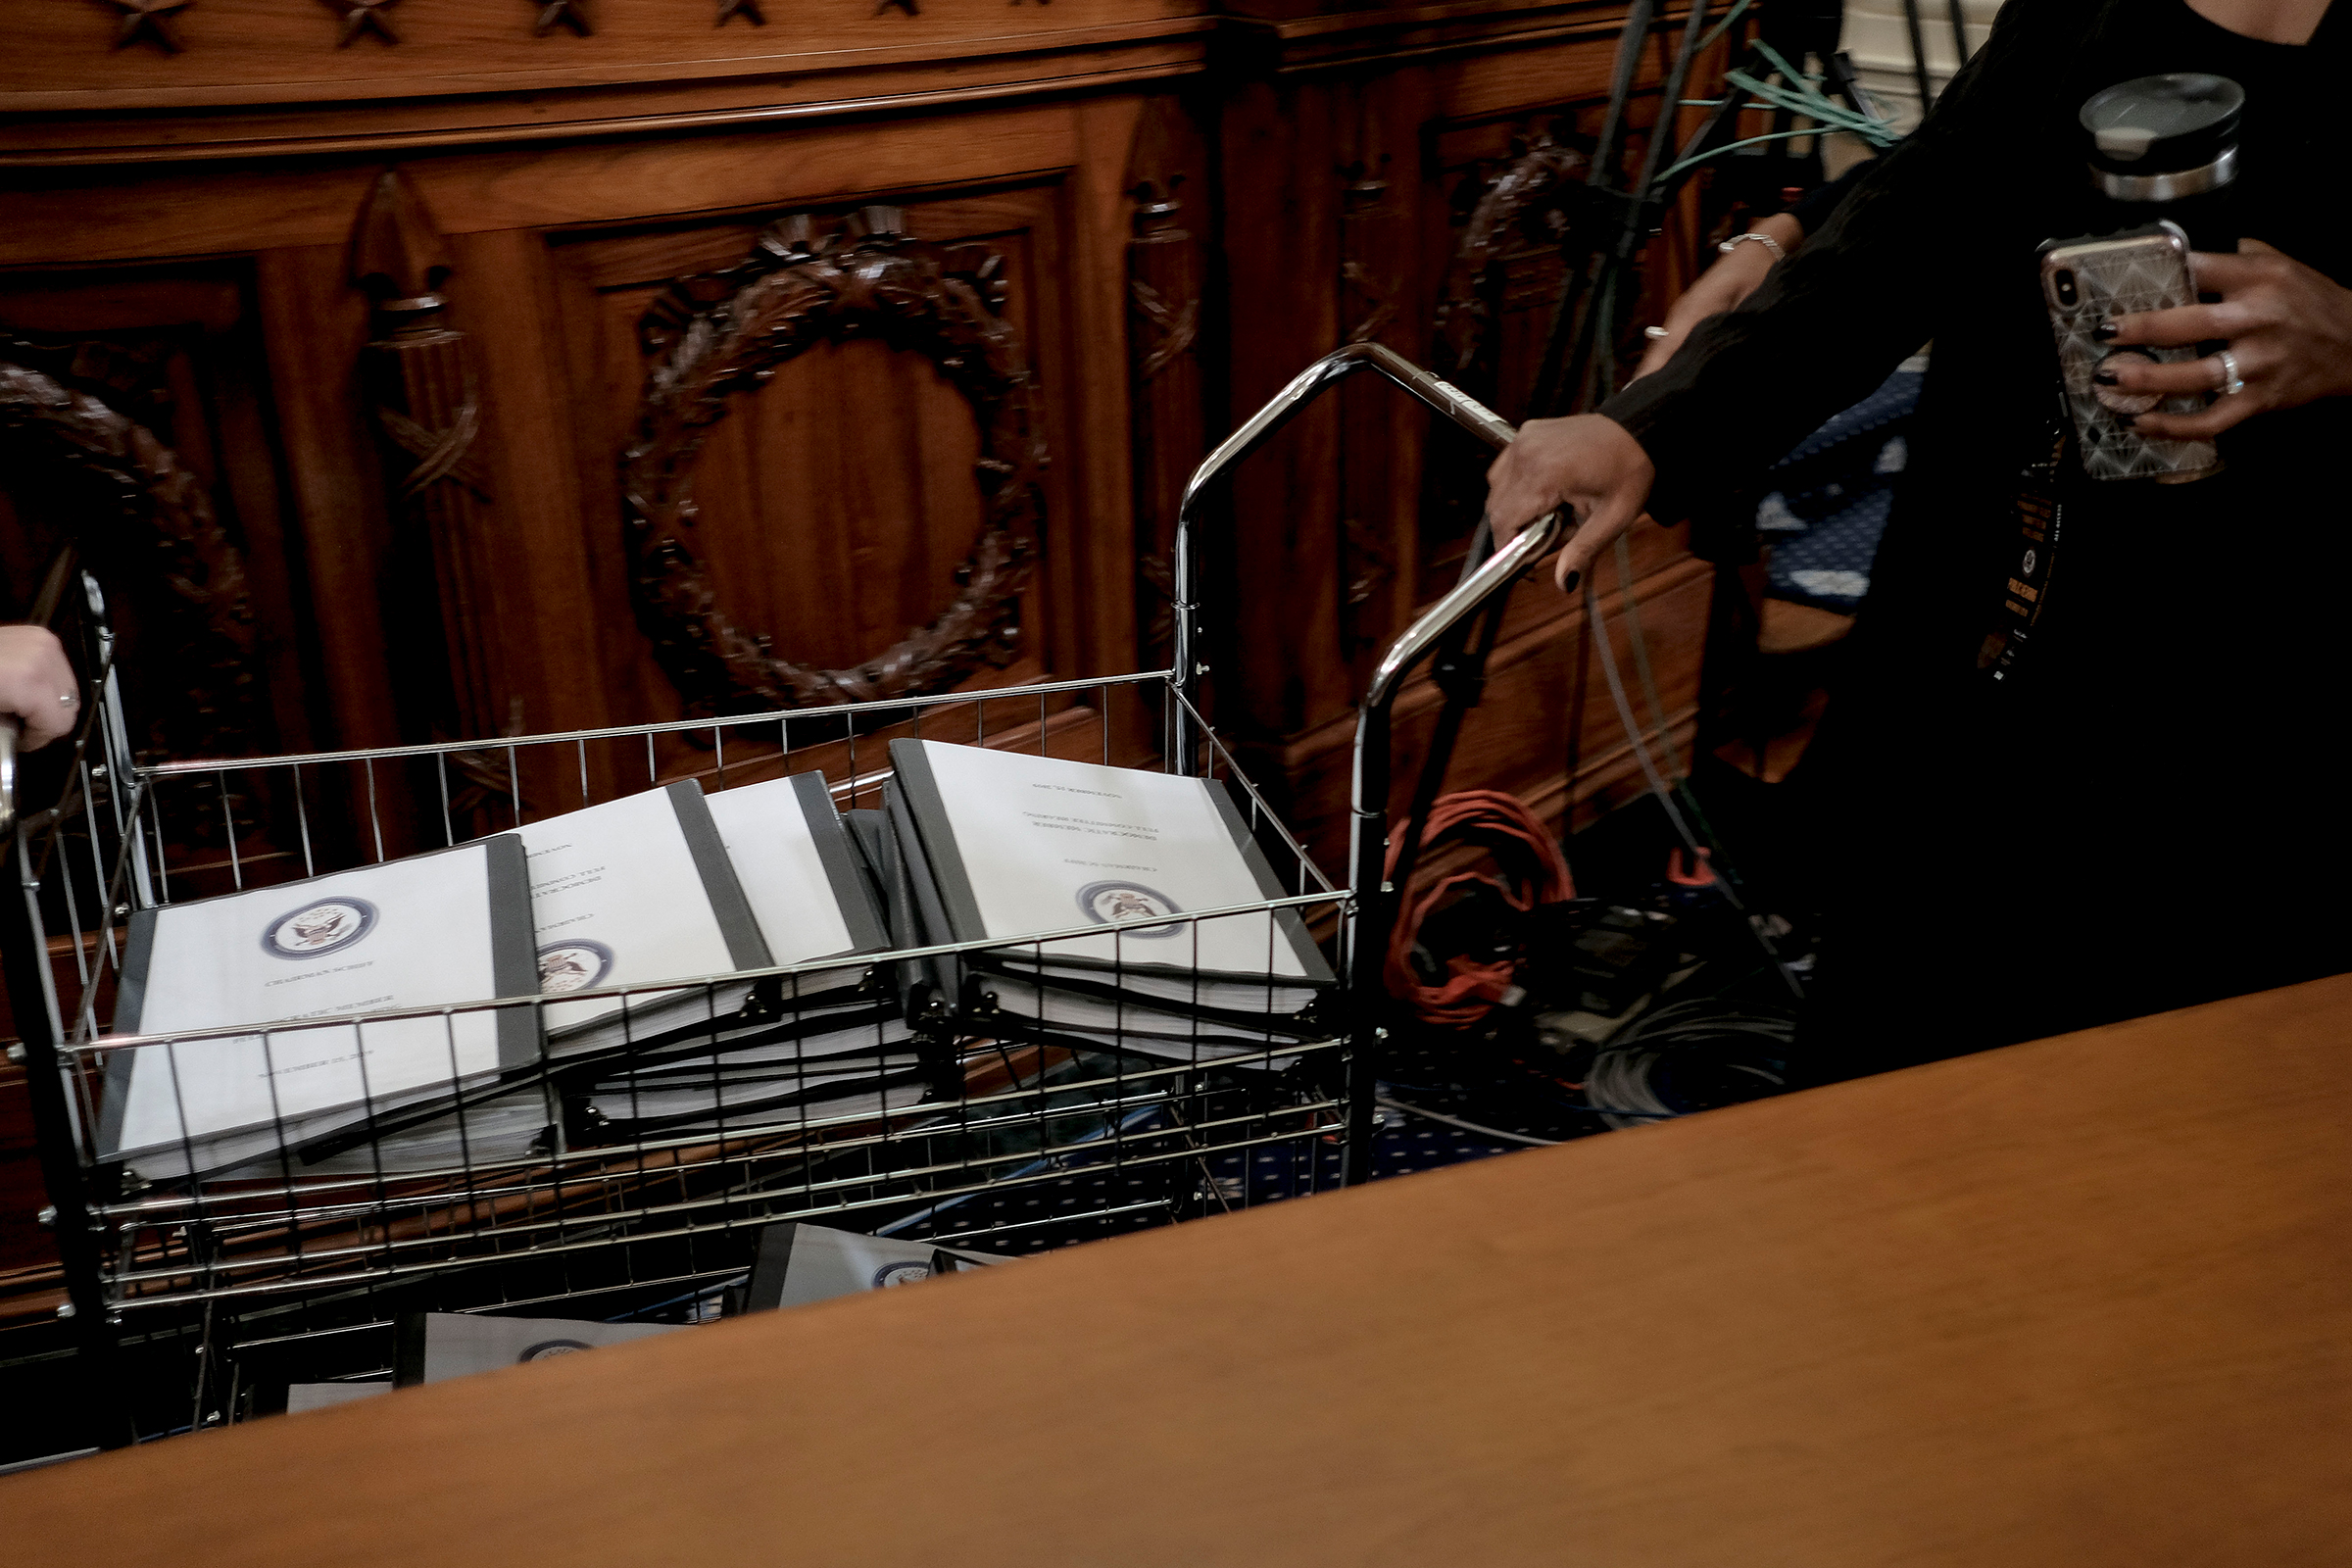 Binders full of notes, testimonies, talking points and more are distributed for Democratic members of Congress at the House Intelligence Committee hearing on the impeachment inquiry, in Washington, D.C., on Nov. 15, 2019. (Gabriella Demczuk for TIME)